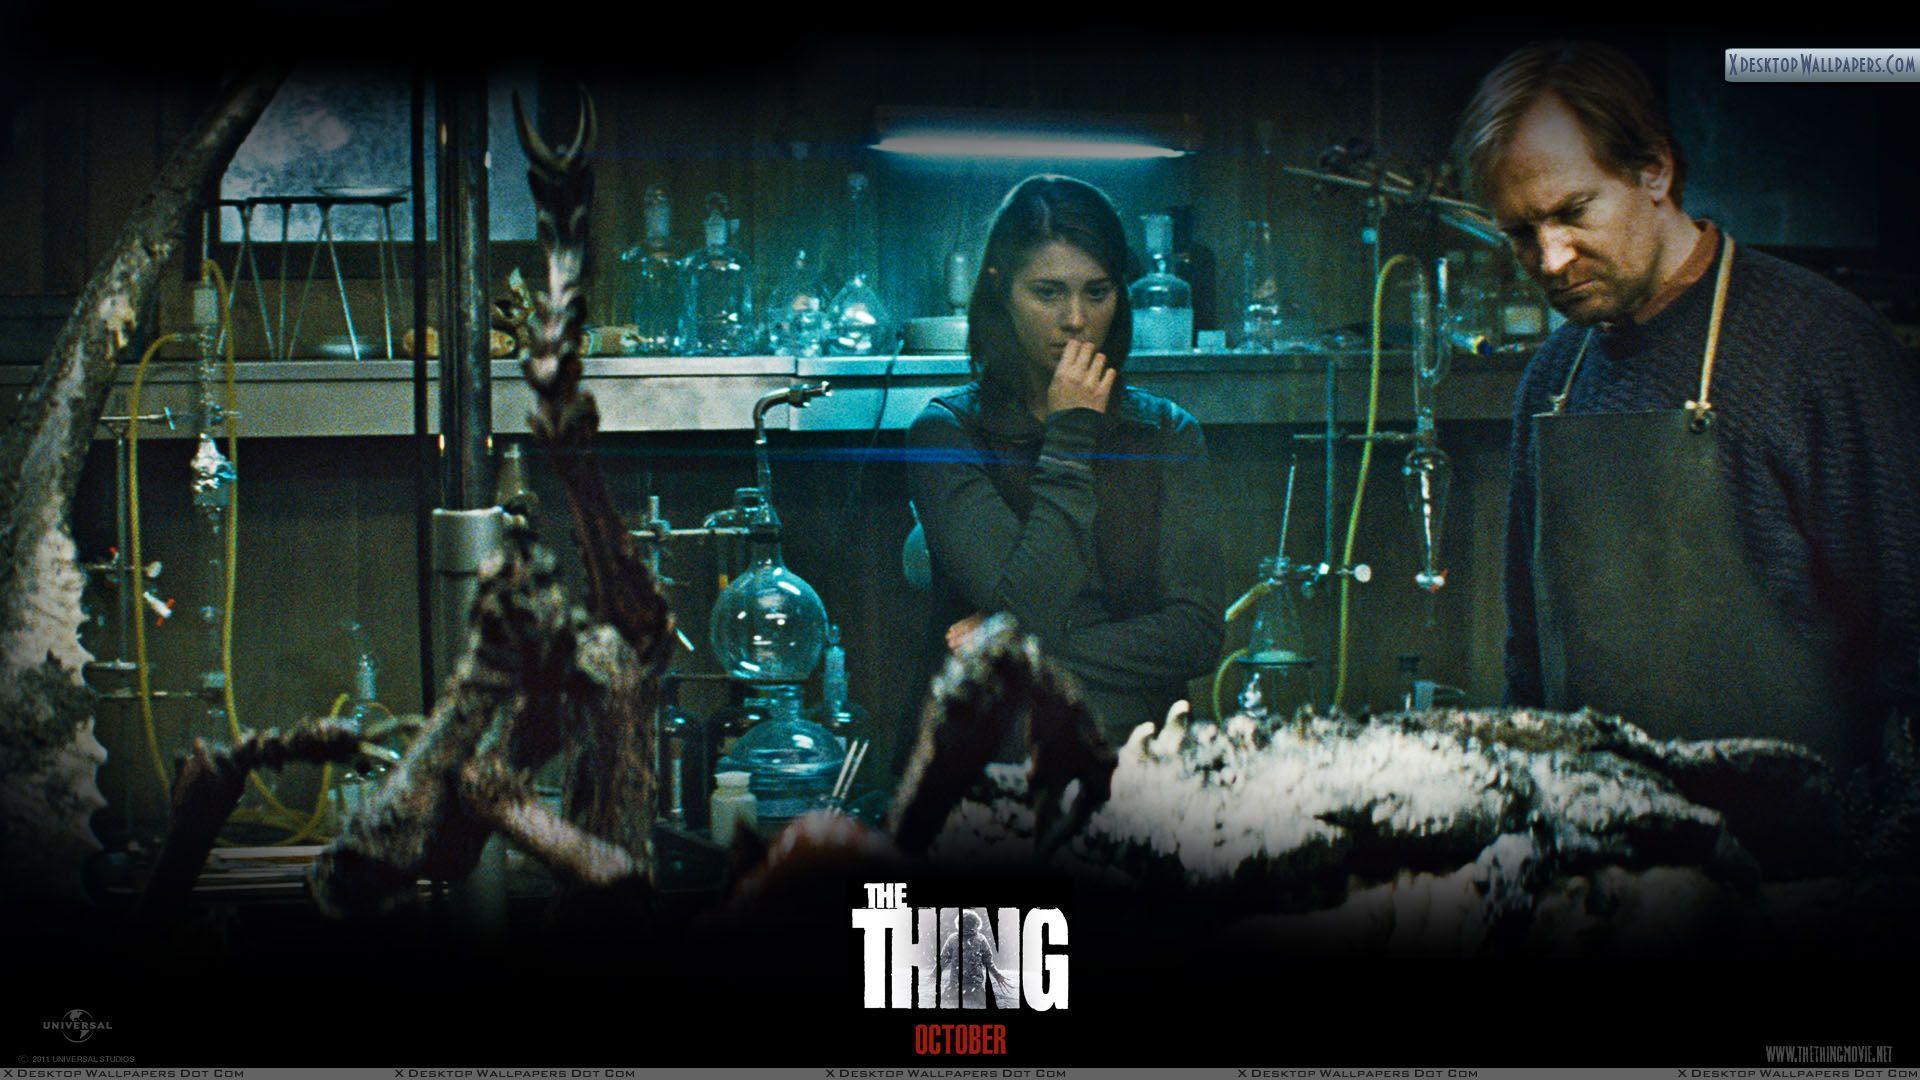 The Thing Wallpaper, Photo & Image in HD